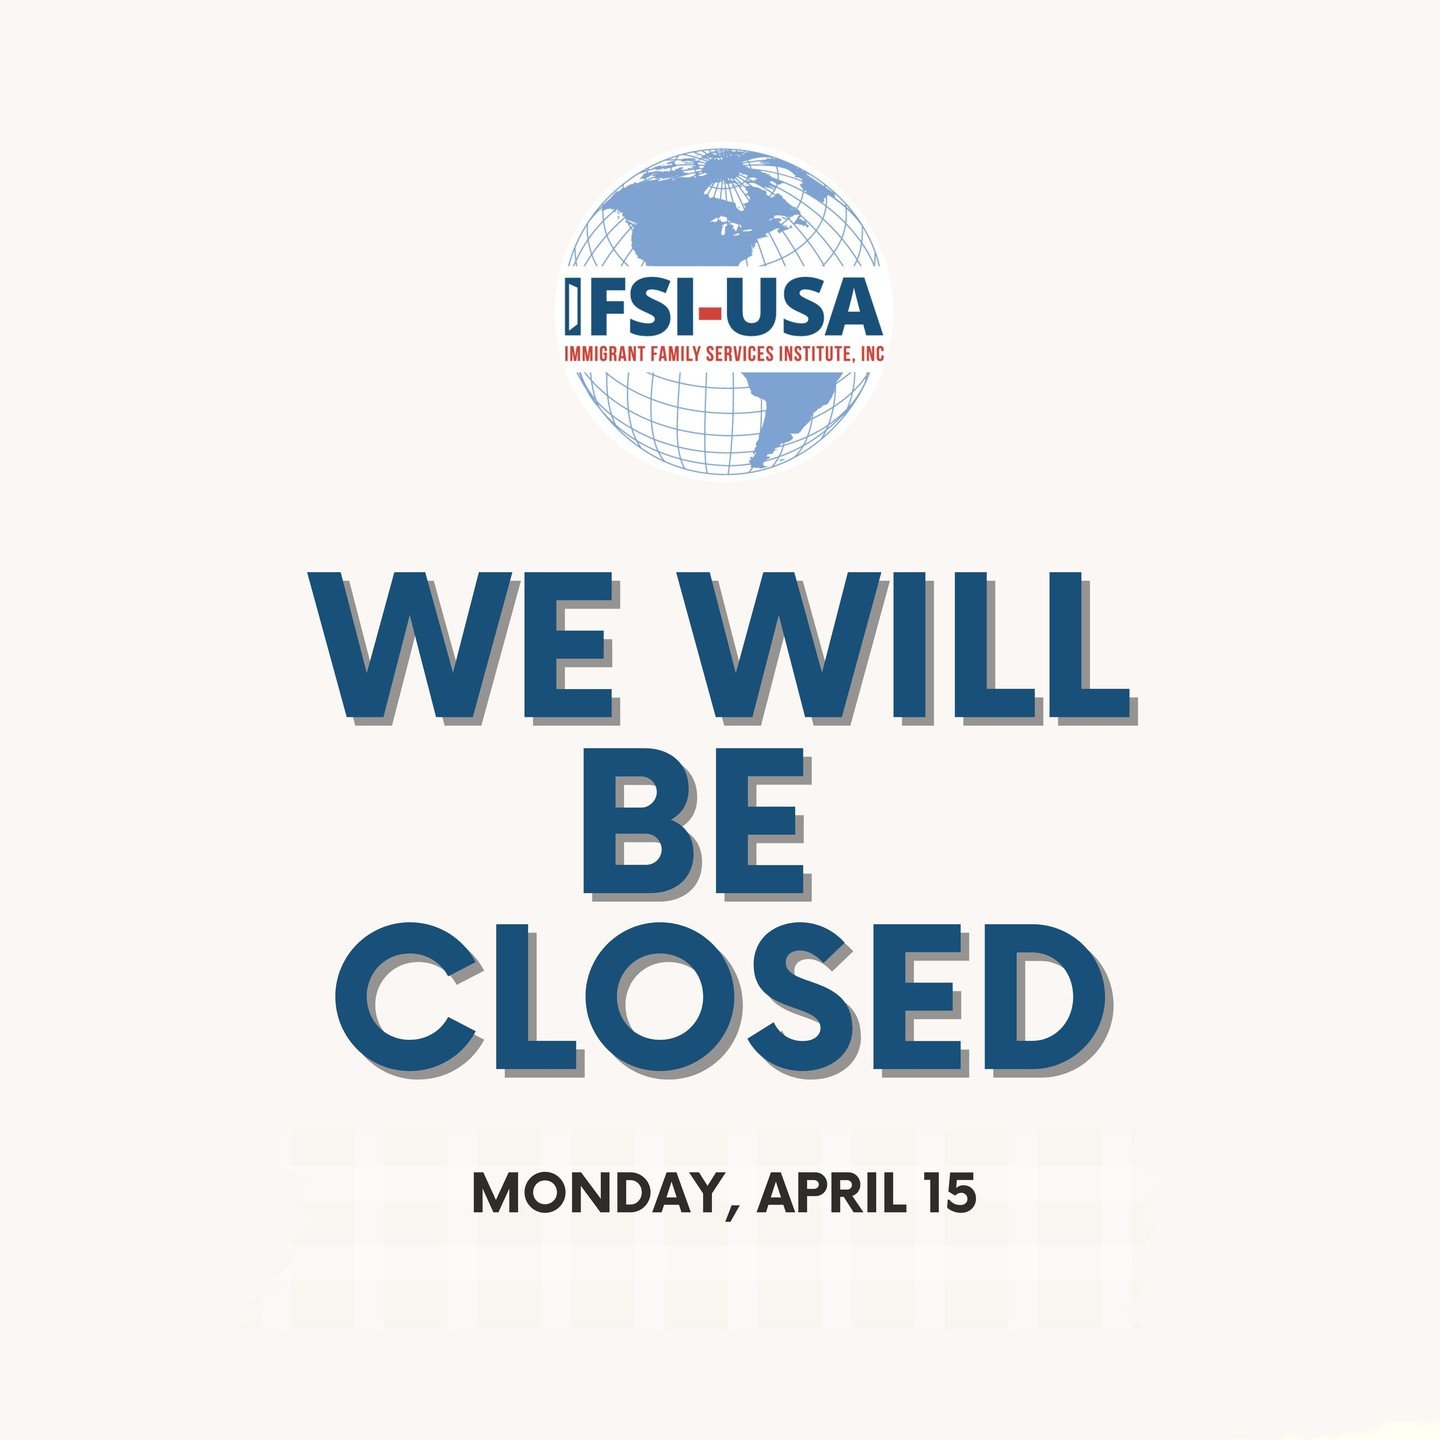 We will be closed, Monday, April 15